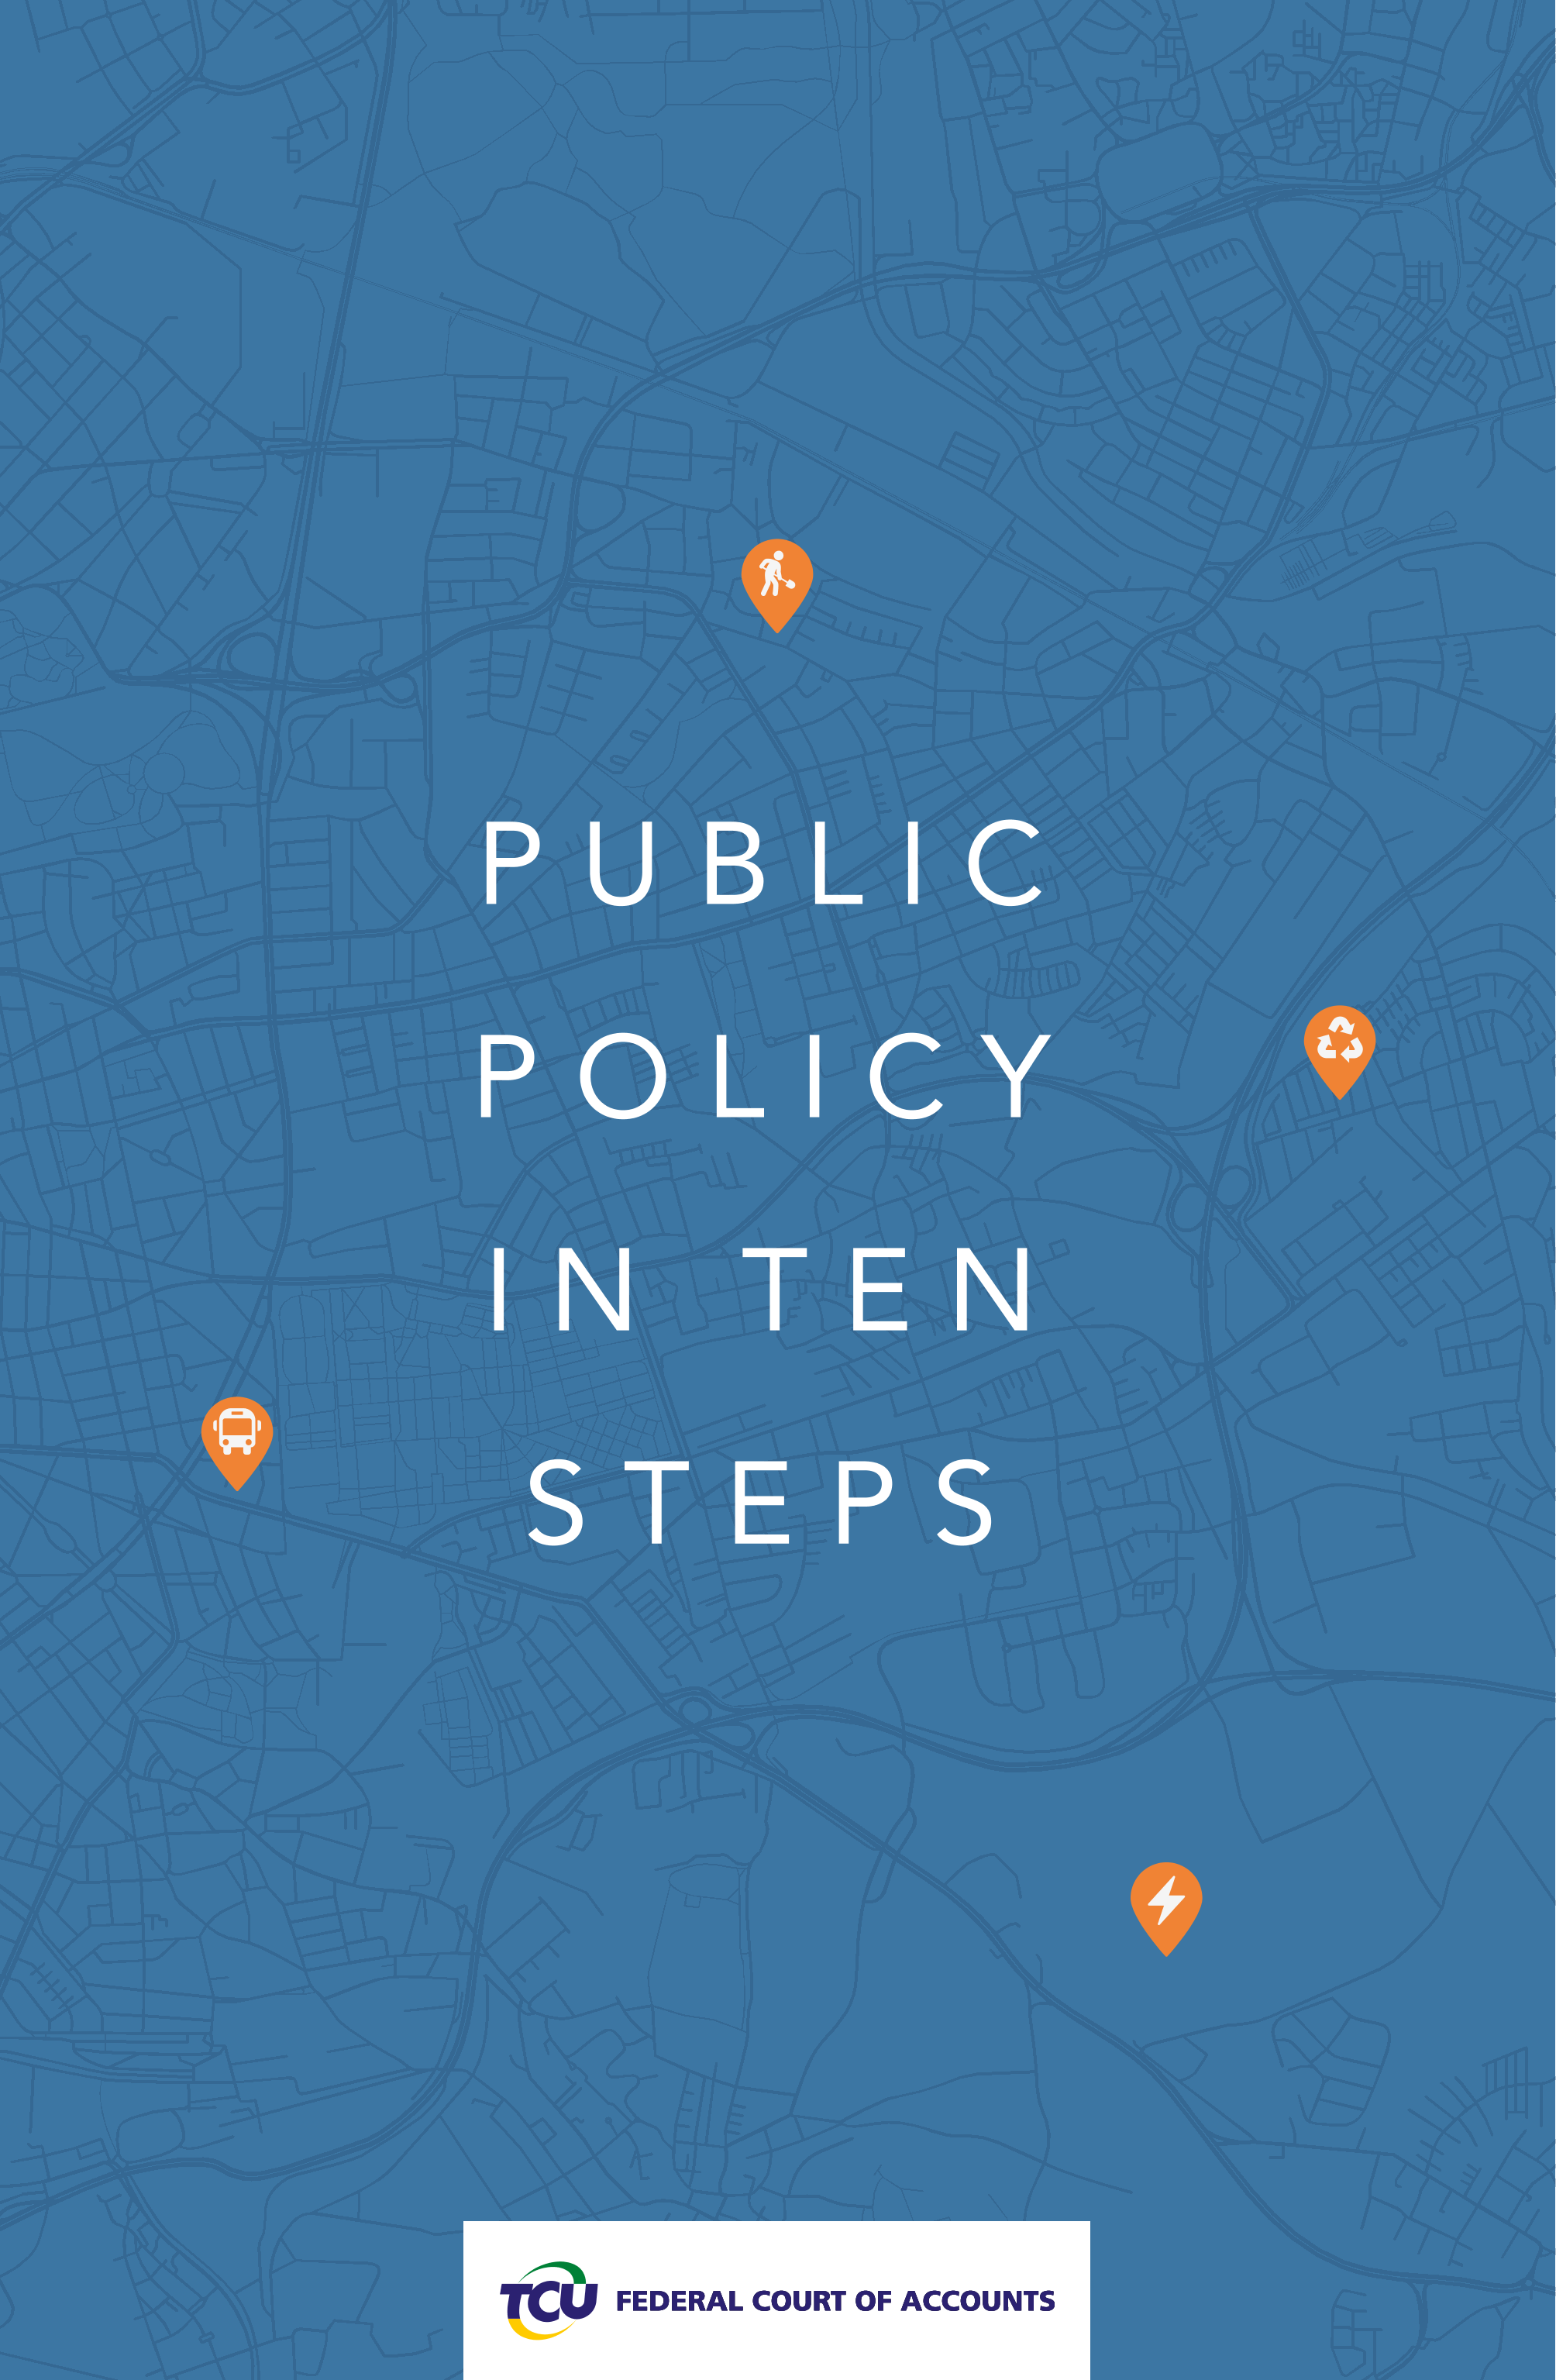 interativo_public policy in ten steps_v4.png